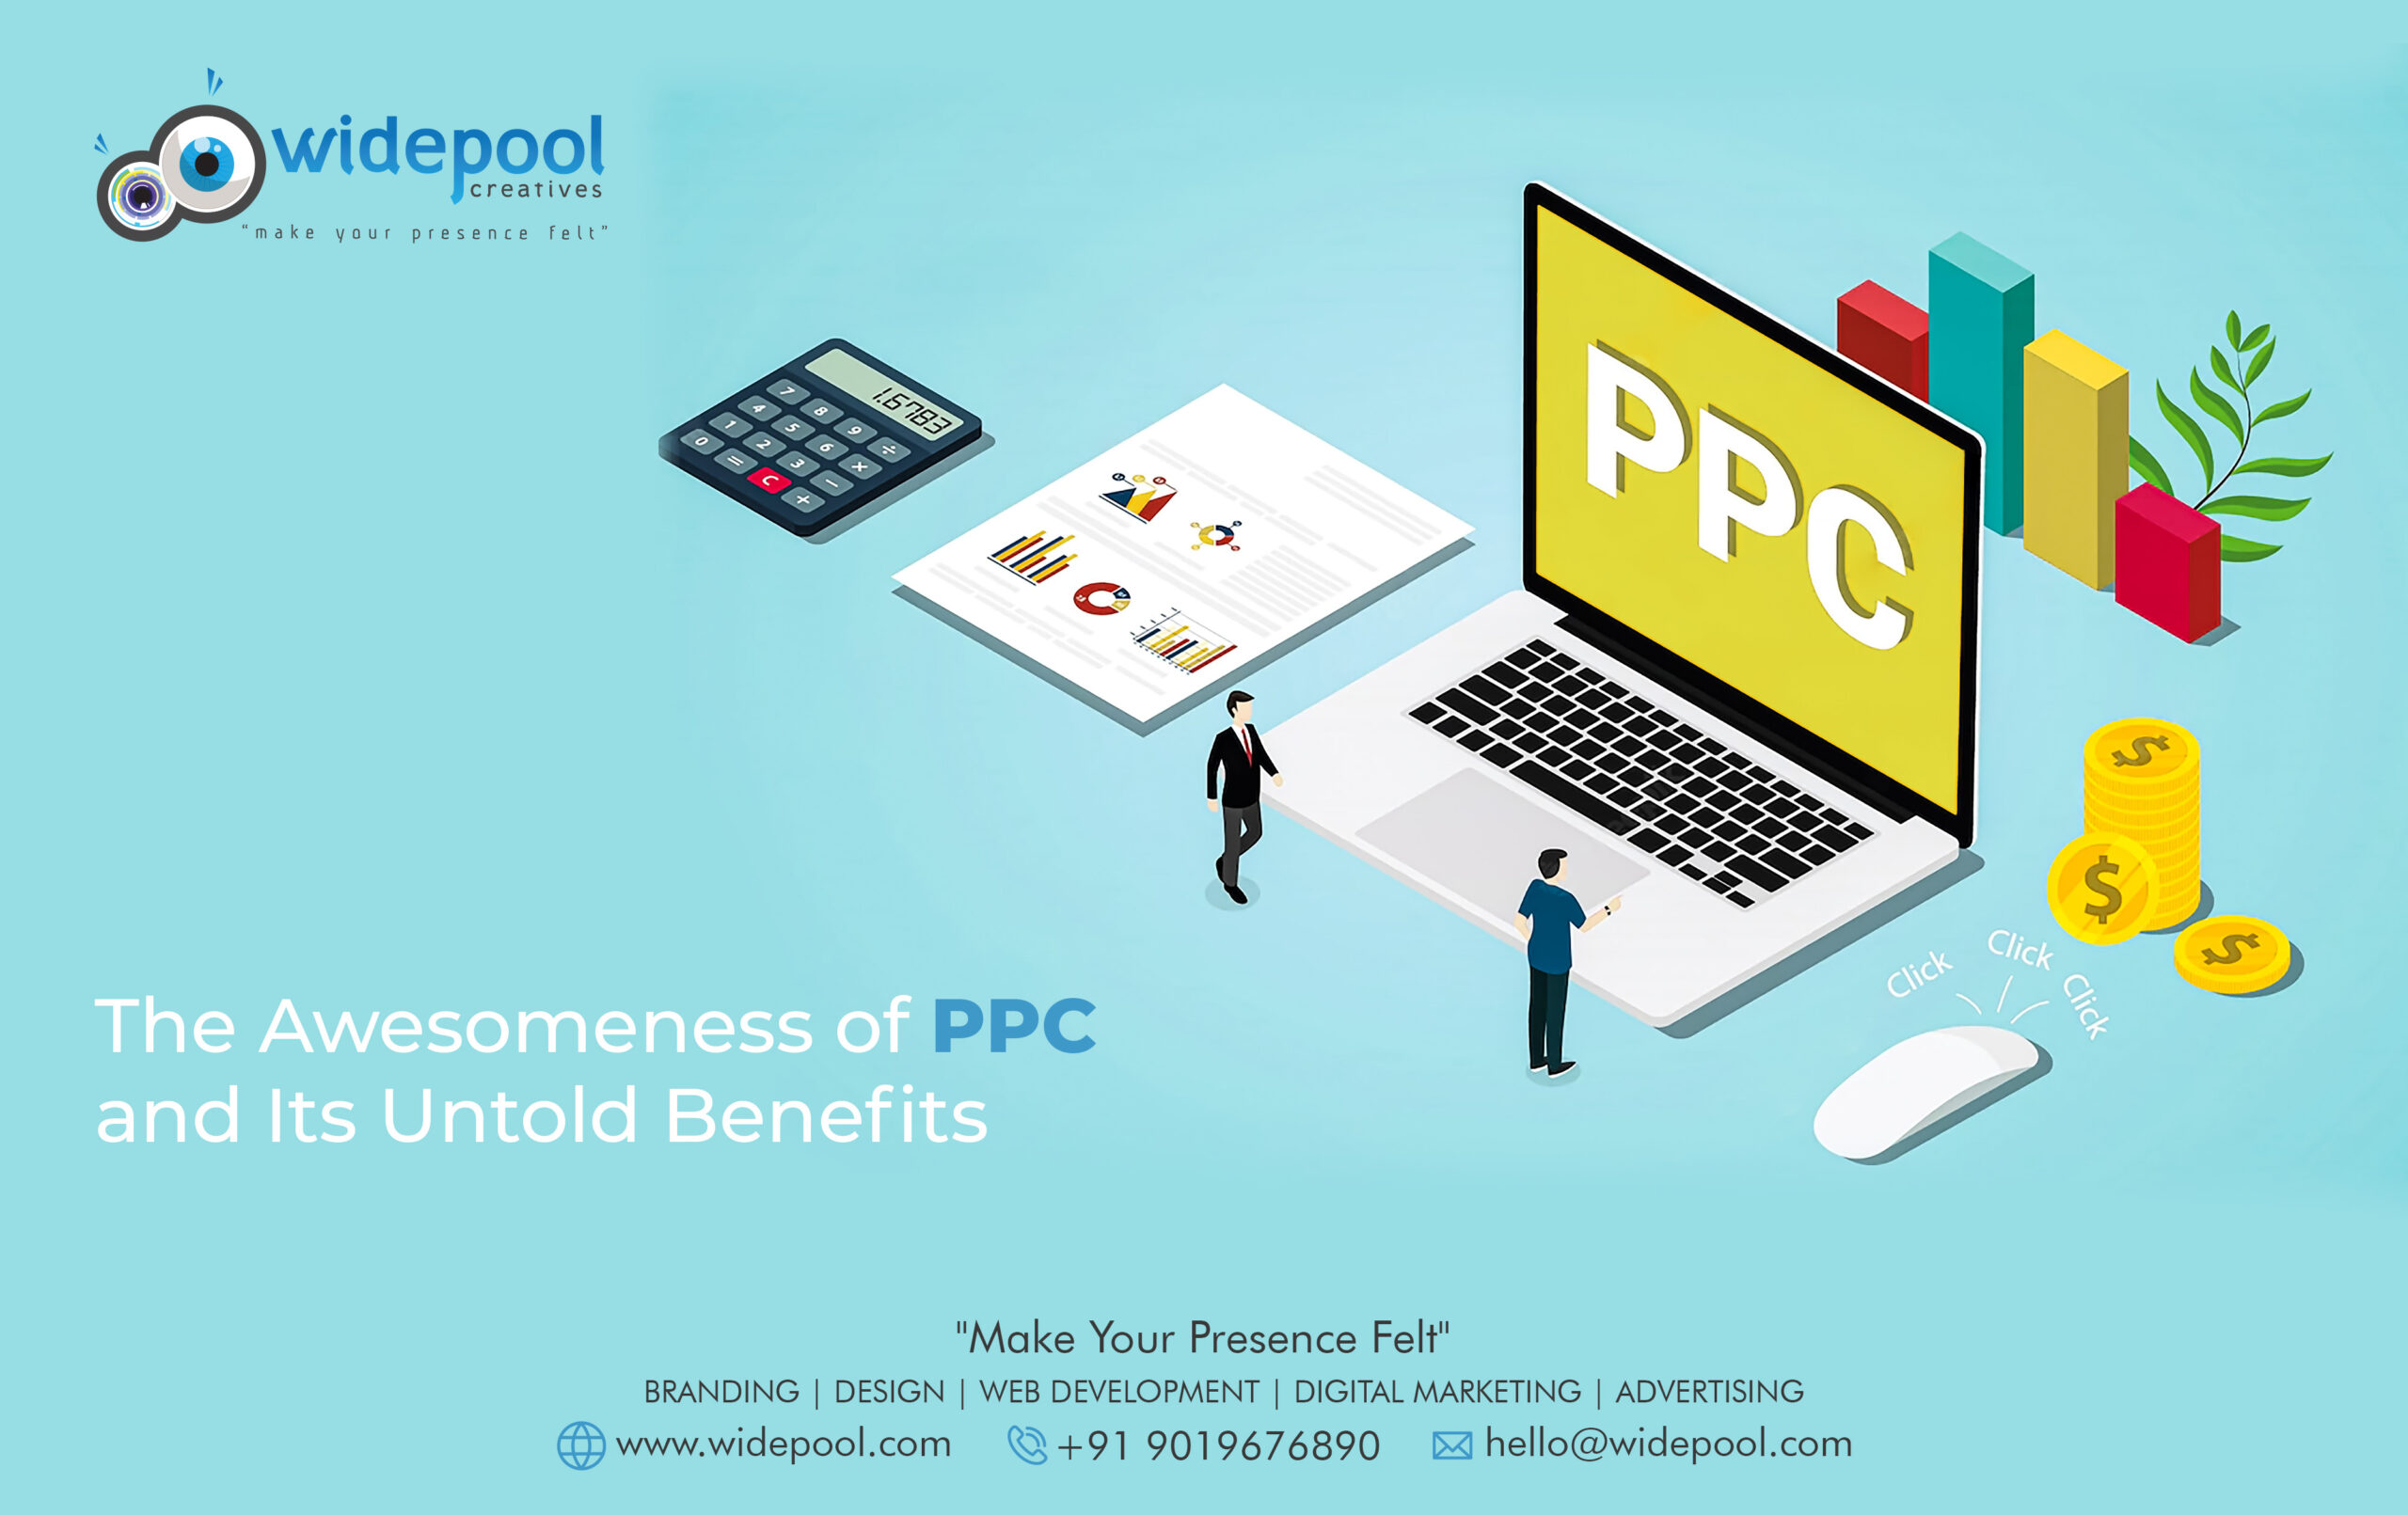 The Awesomeness of PPC and Its Untold Benefits